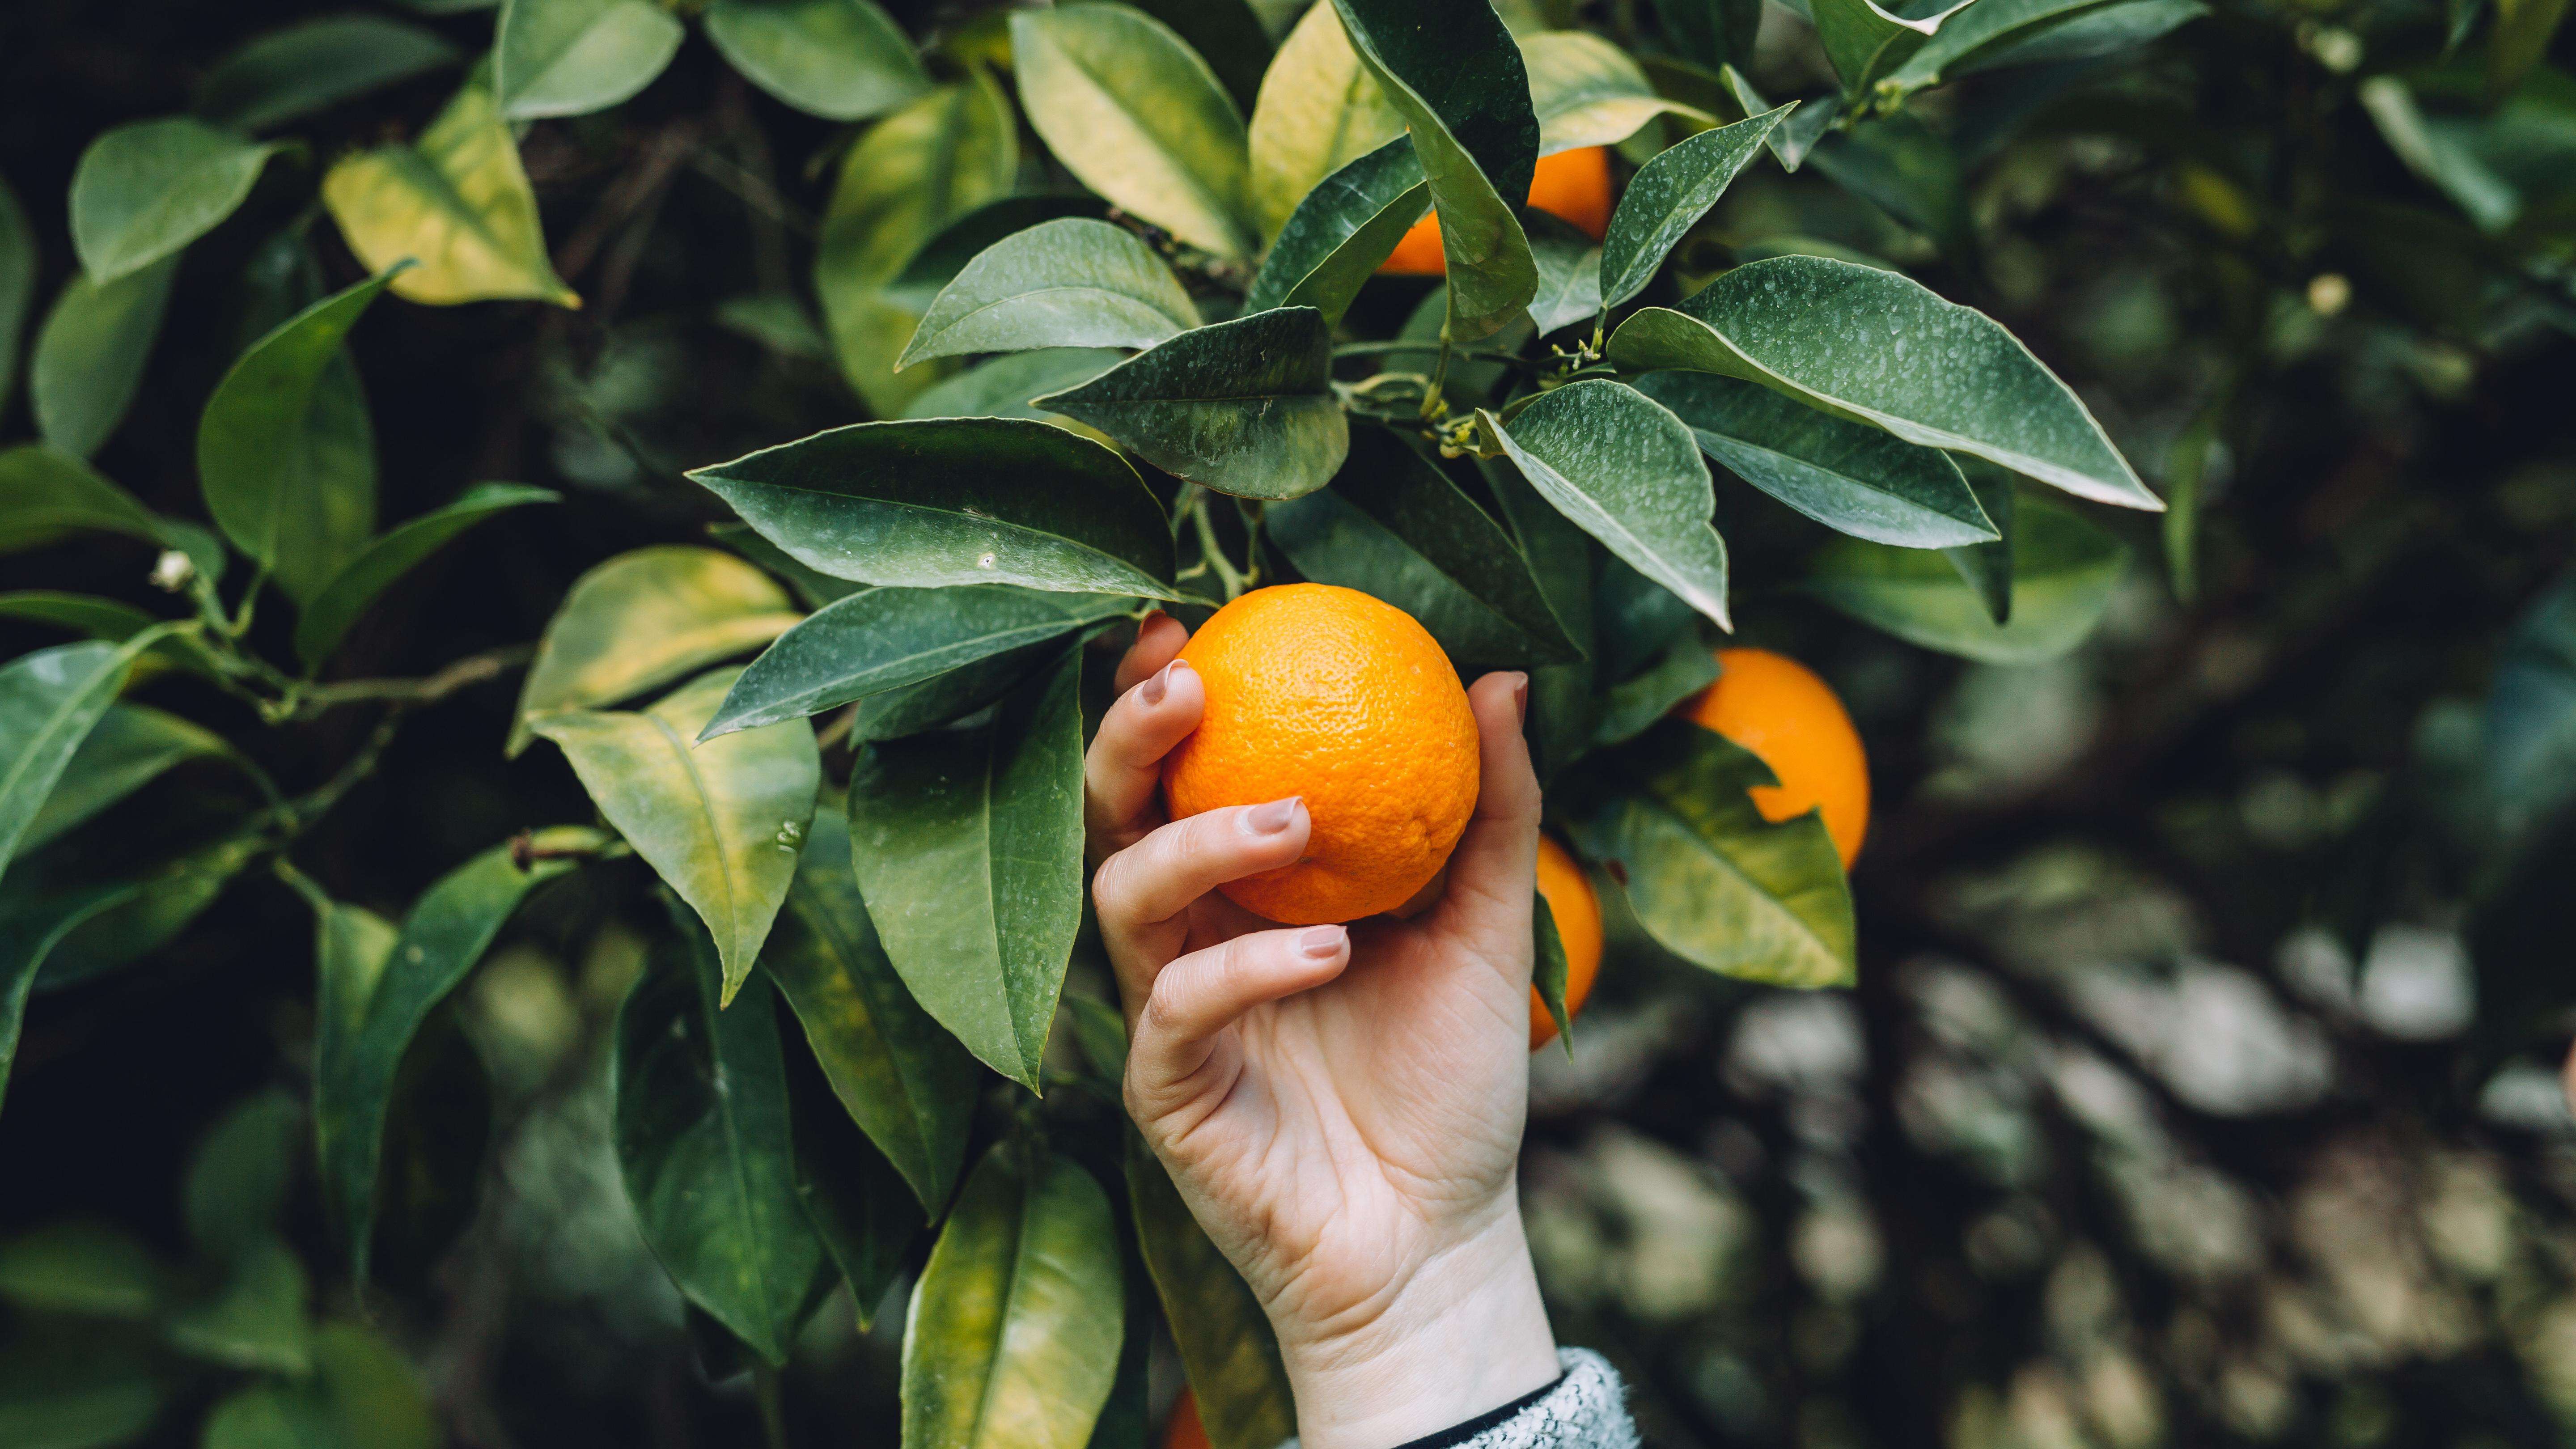 closeup of a person's hand reaching up to hold an orange on an orange tree